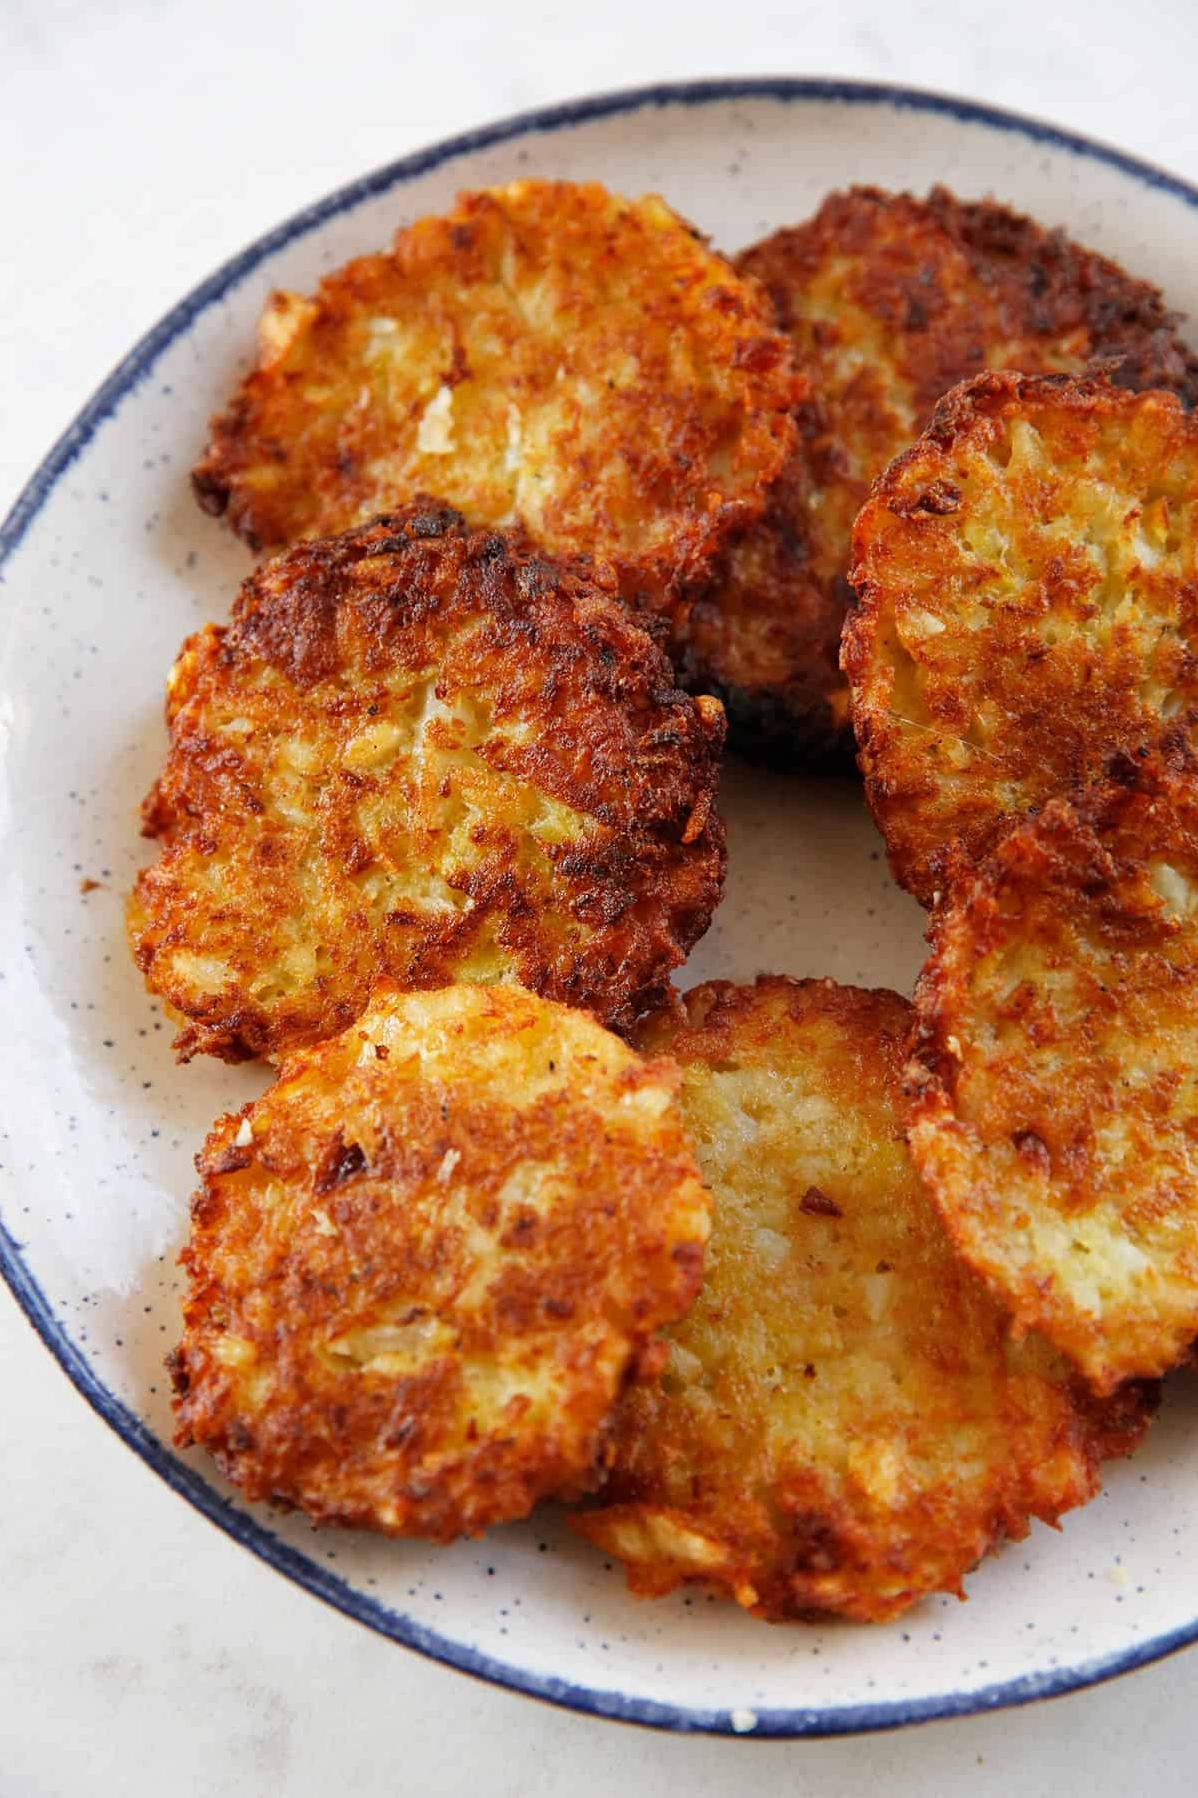  Crispy and golden brown, these latkes are the real deal!